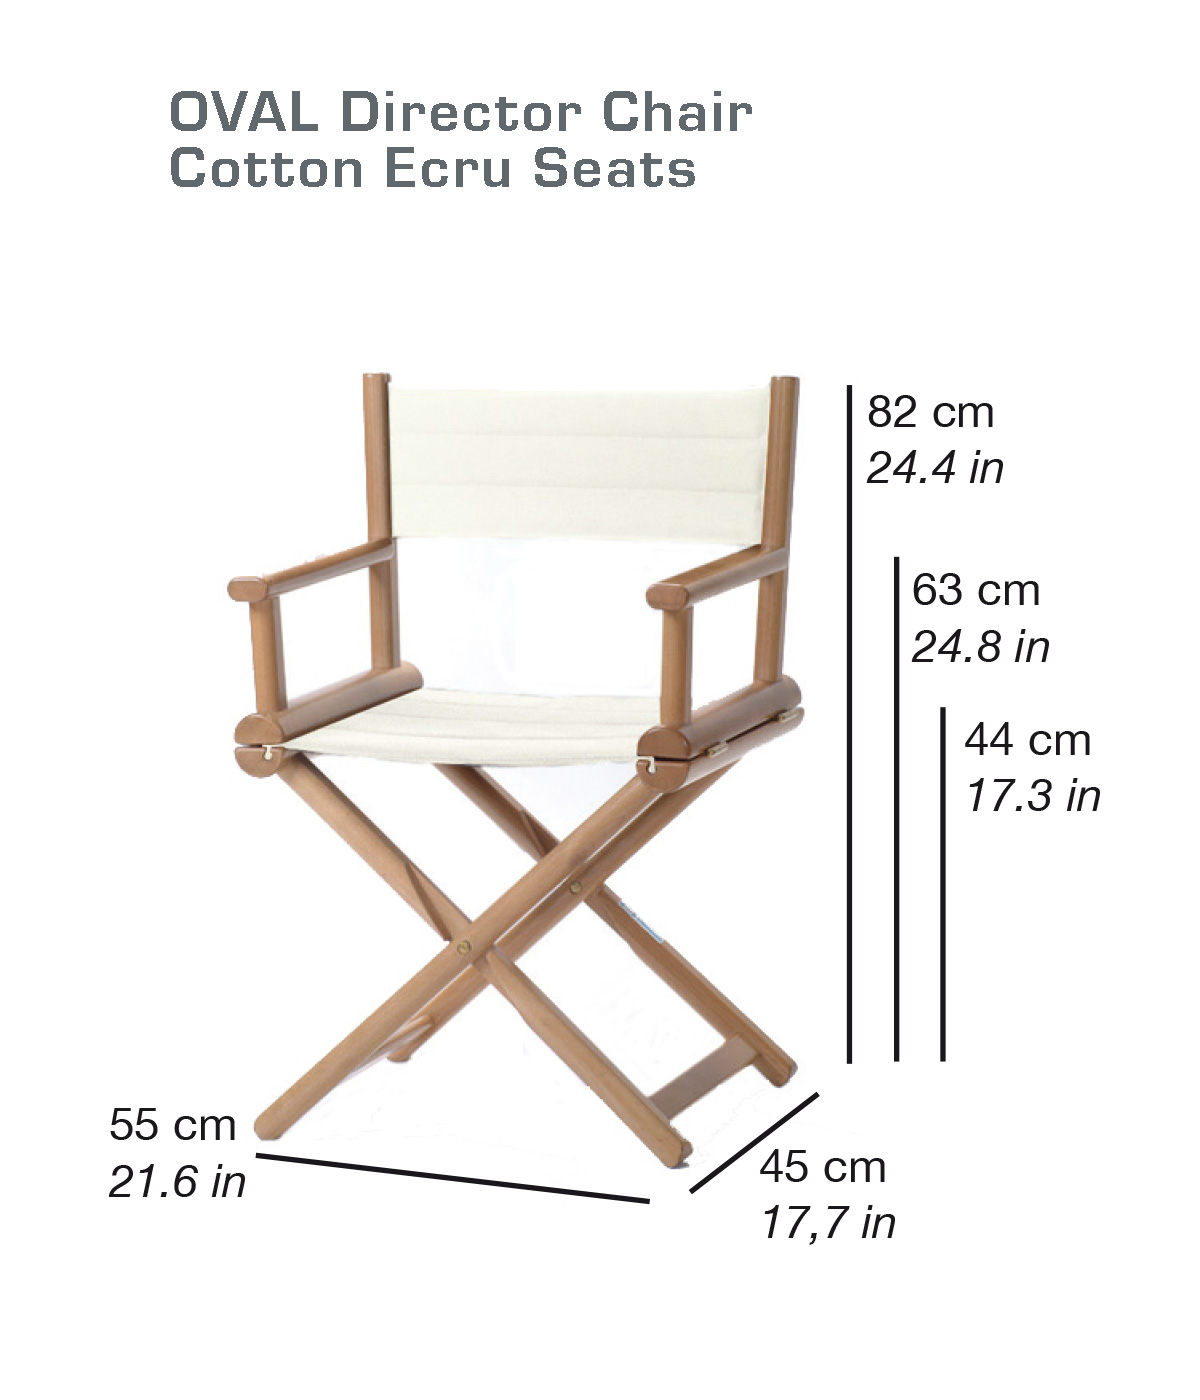 OVAL Director Chair | Cotton